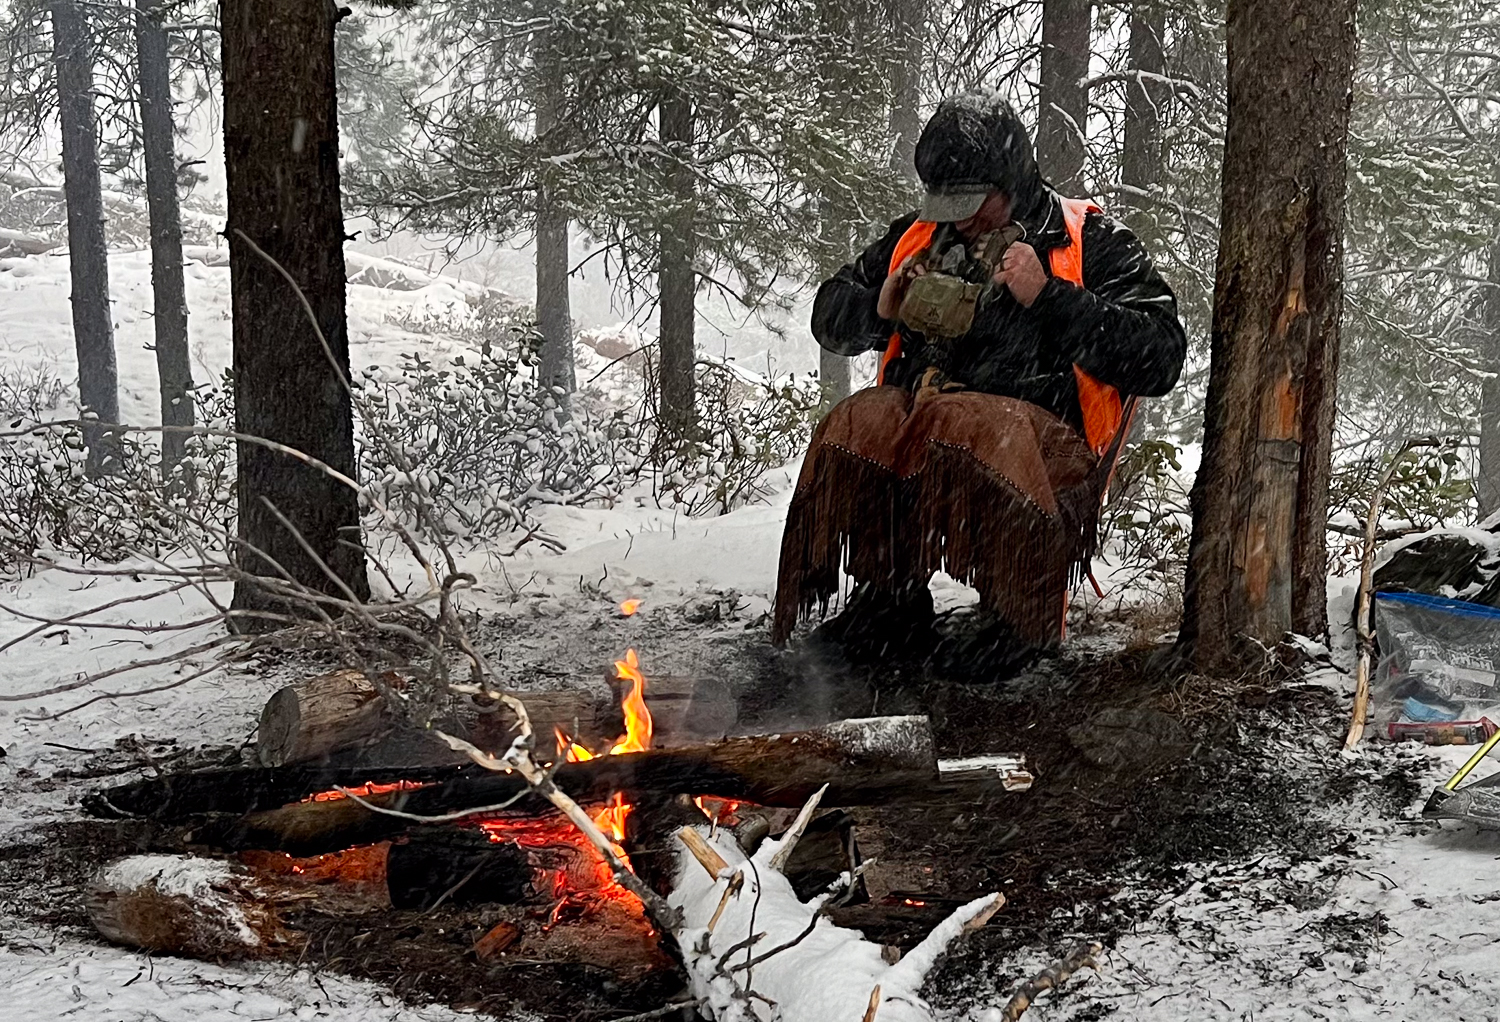 The warming fire can be a necessity for Montana’s general season.